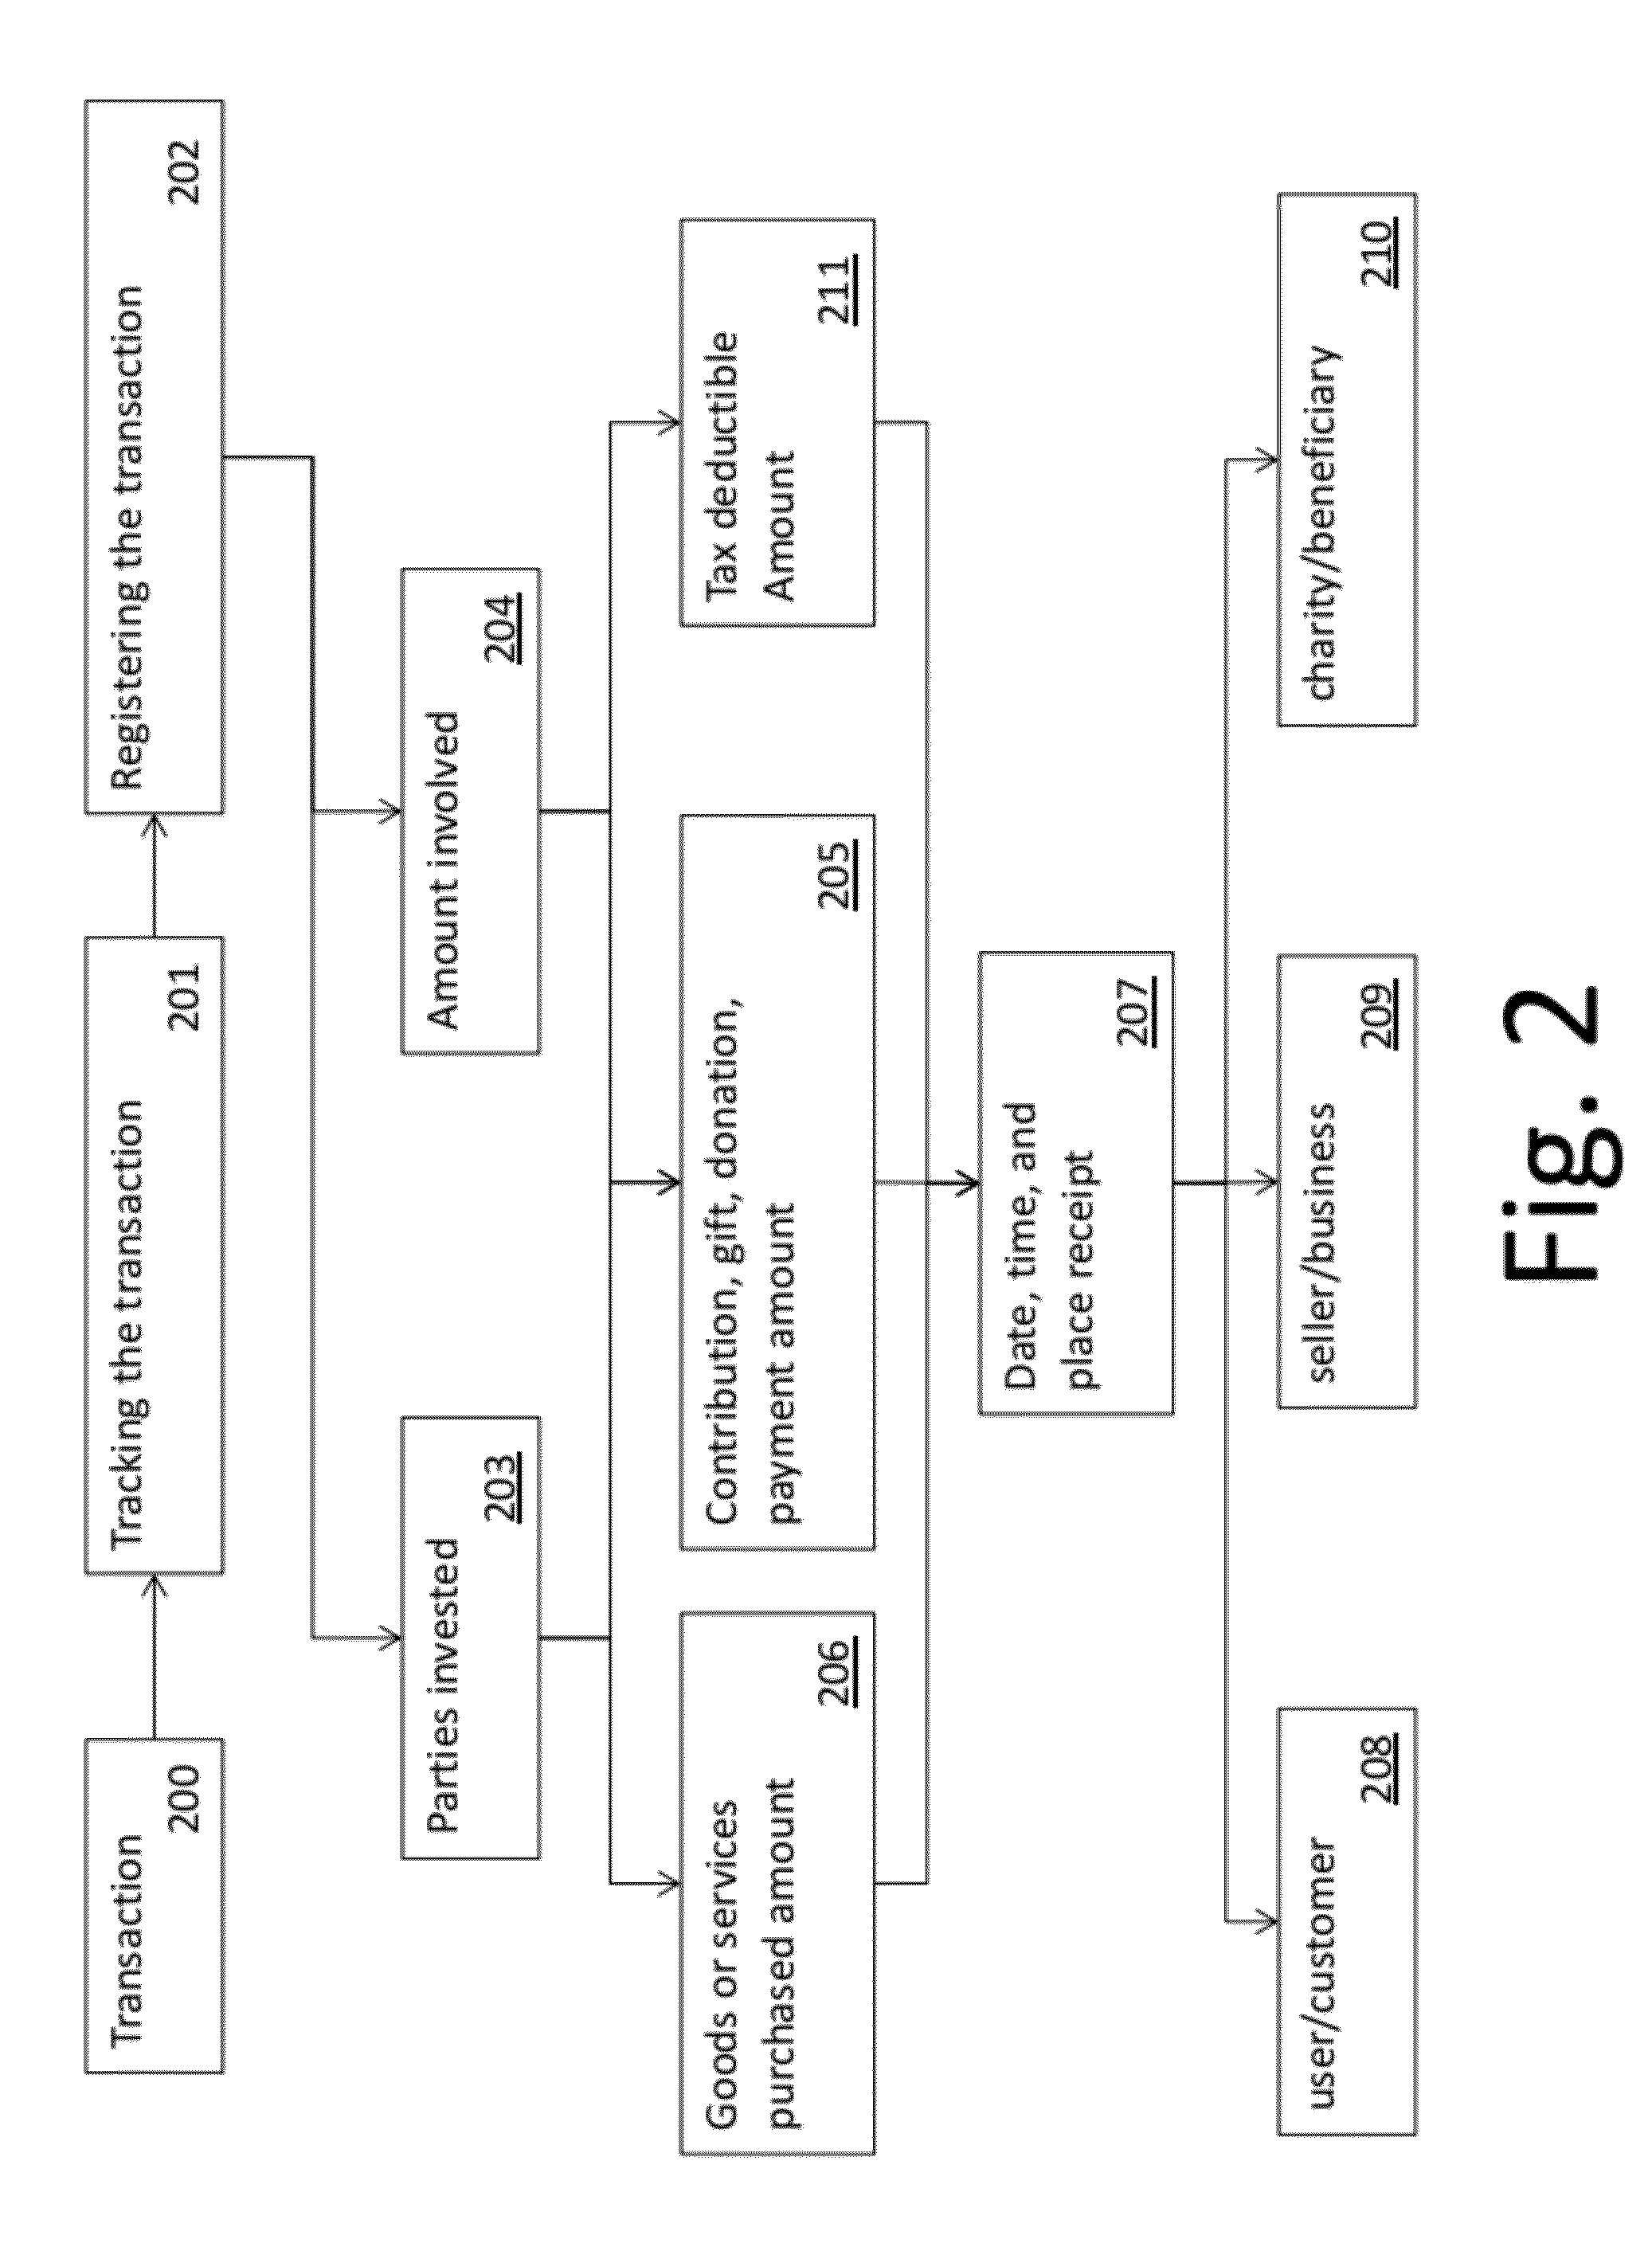 Method for Providing Donations to Third Parties During a Financial Transaction and Tracking the Details of the Financial Transactions For Donation Contributors and Recipients